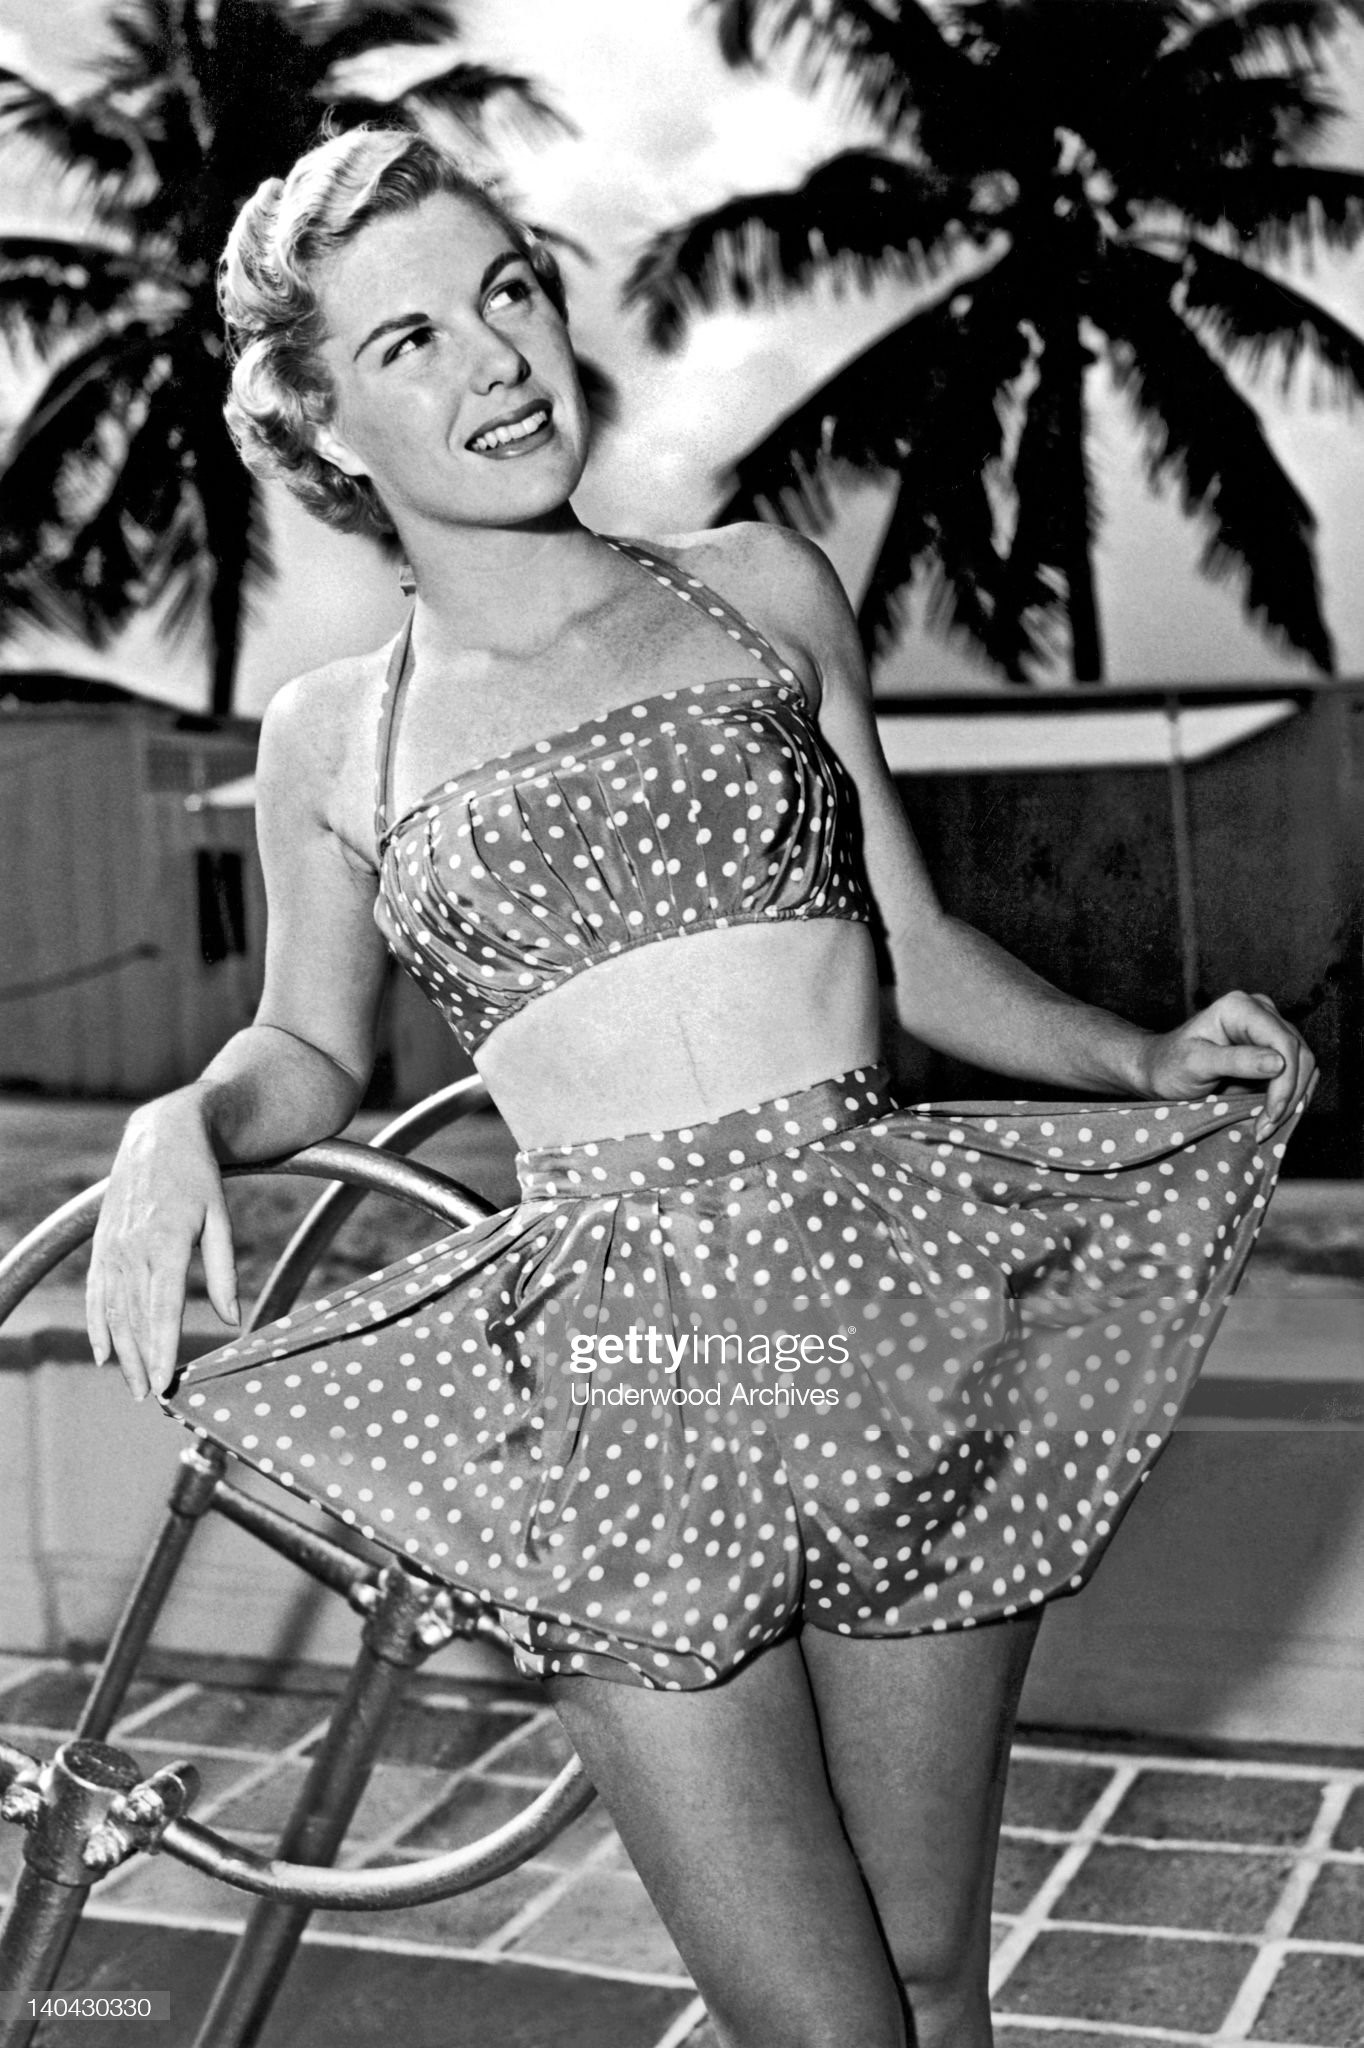 Baby rompers bounce onto the beach fashion scene for big girls, Miami Beach, Florida, February 24, 1950. Designed by Garbar, they are polka dotted pure silk.